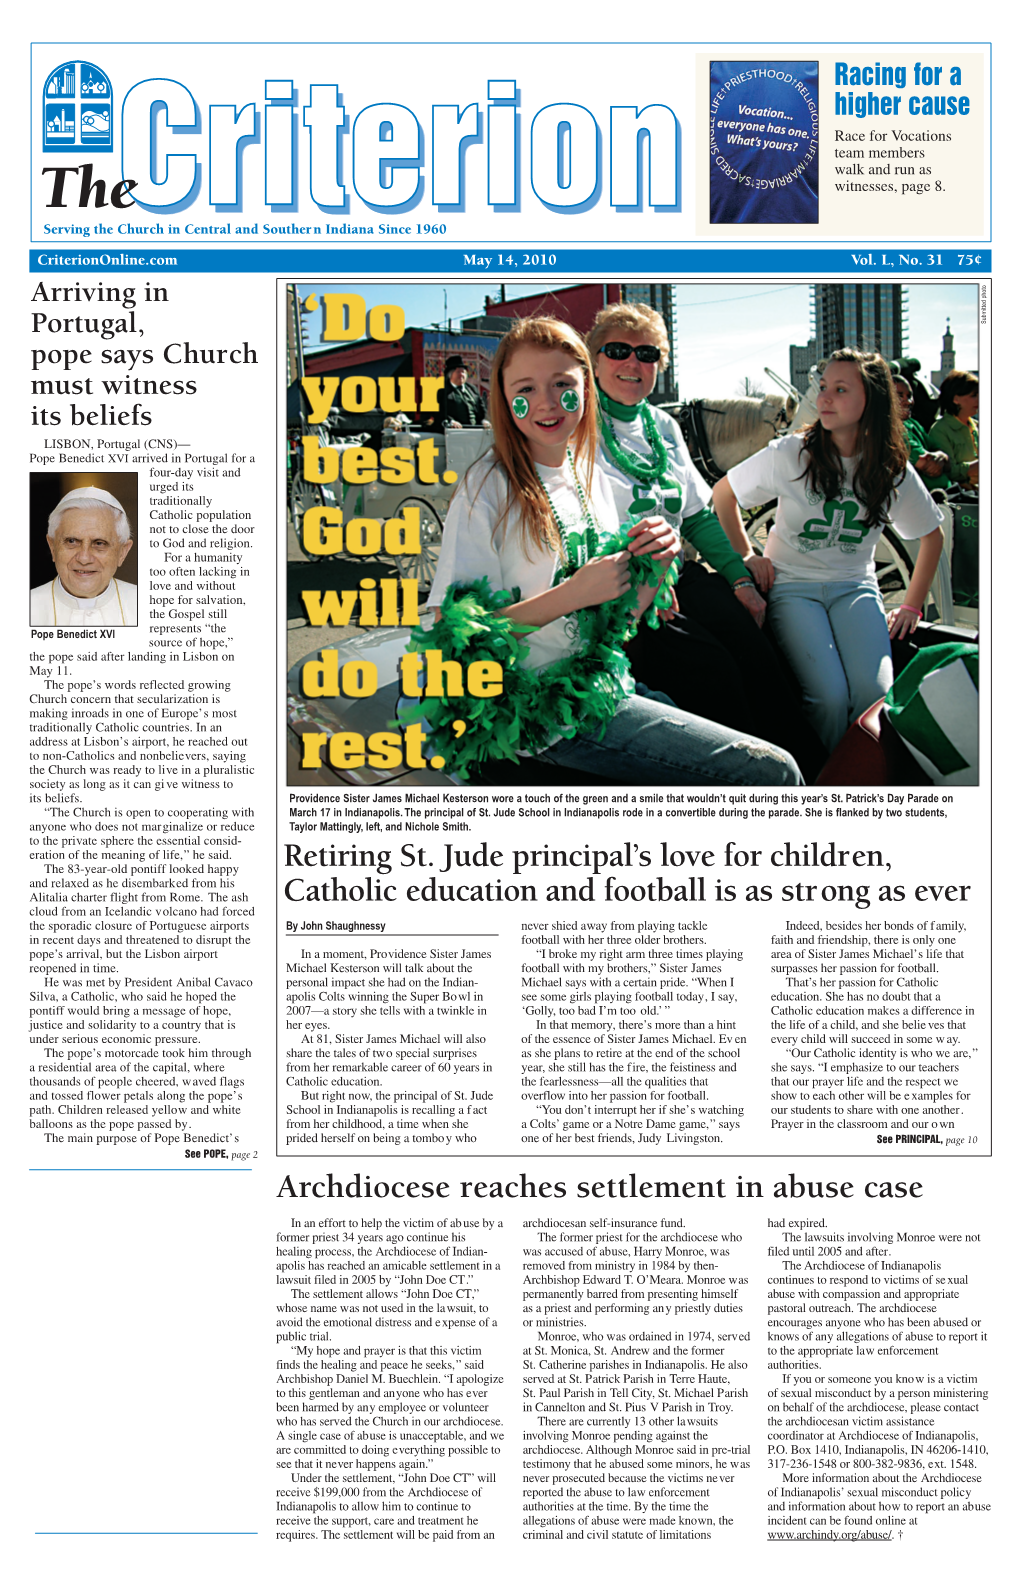 Archdiocese Reaches Settlement in Abuse Case Retiring St. Jude Principal's Love for Children, Catholic Education and Football